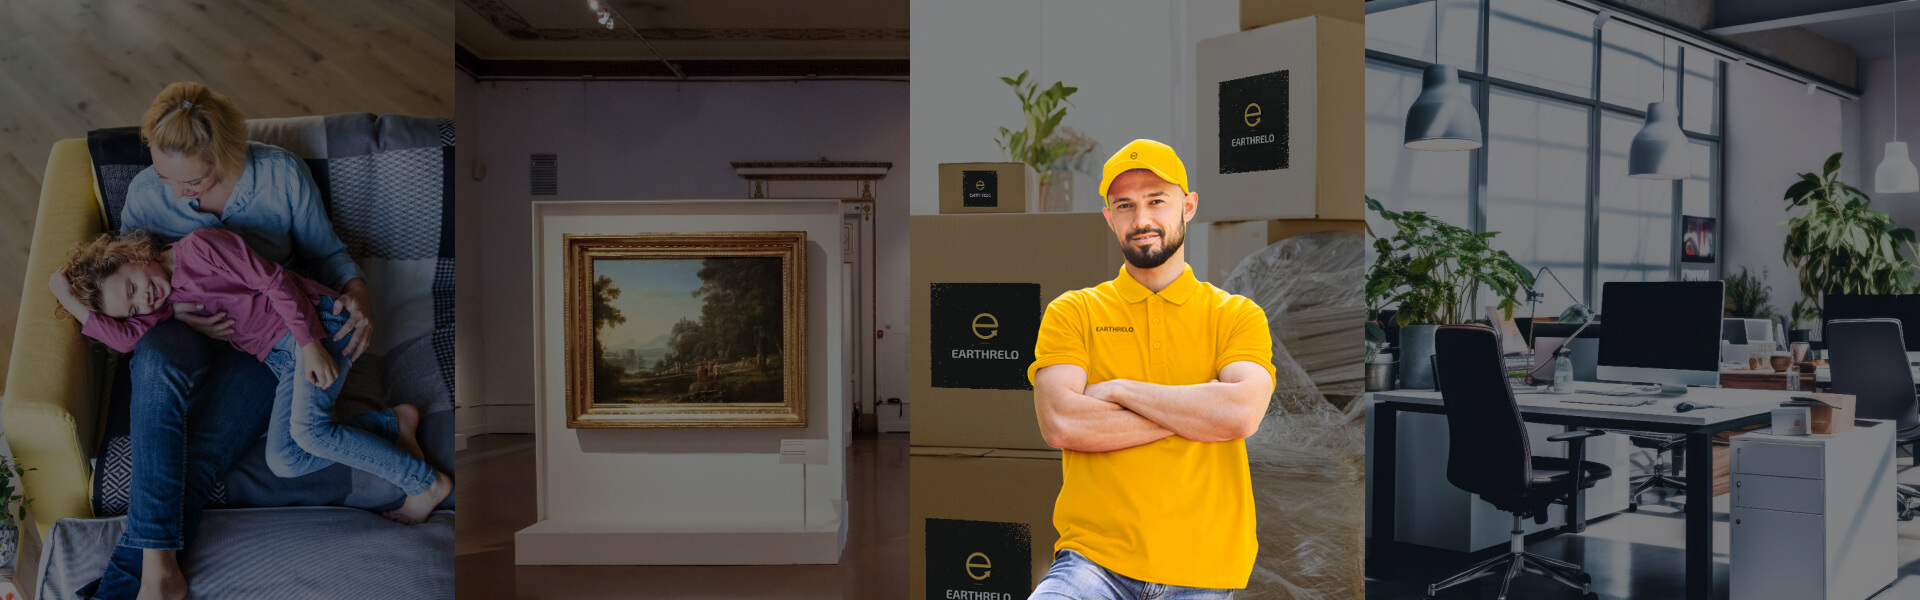 Your Reliable International Moving Partner - Earthrelo